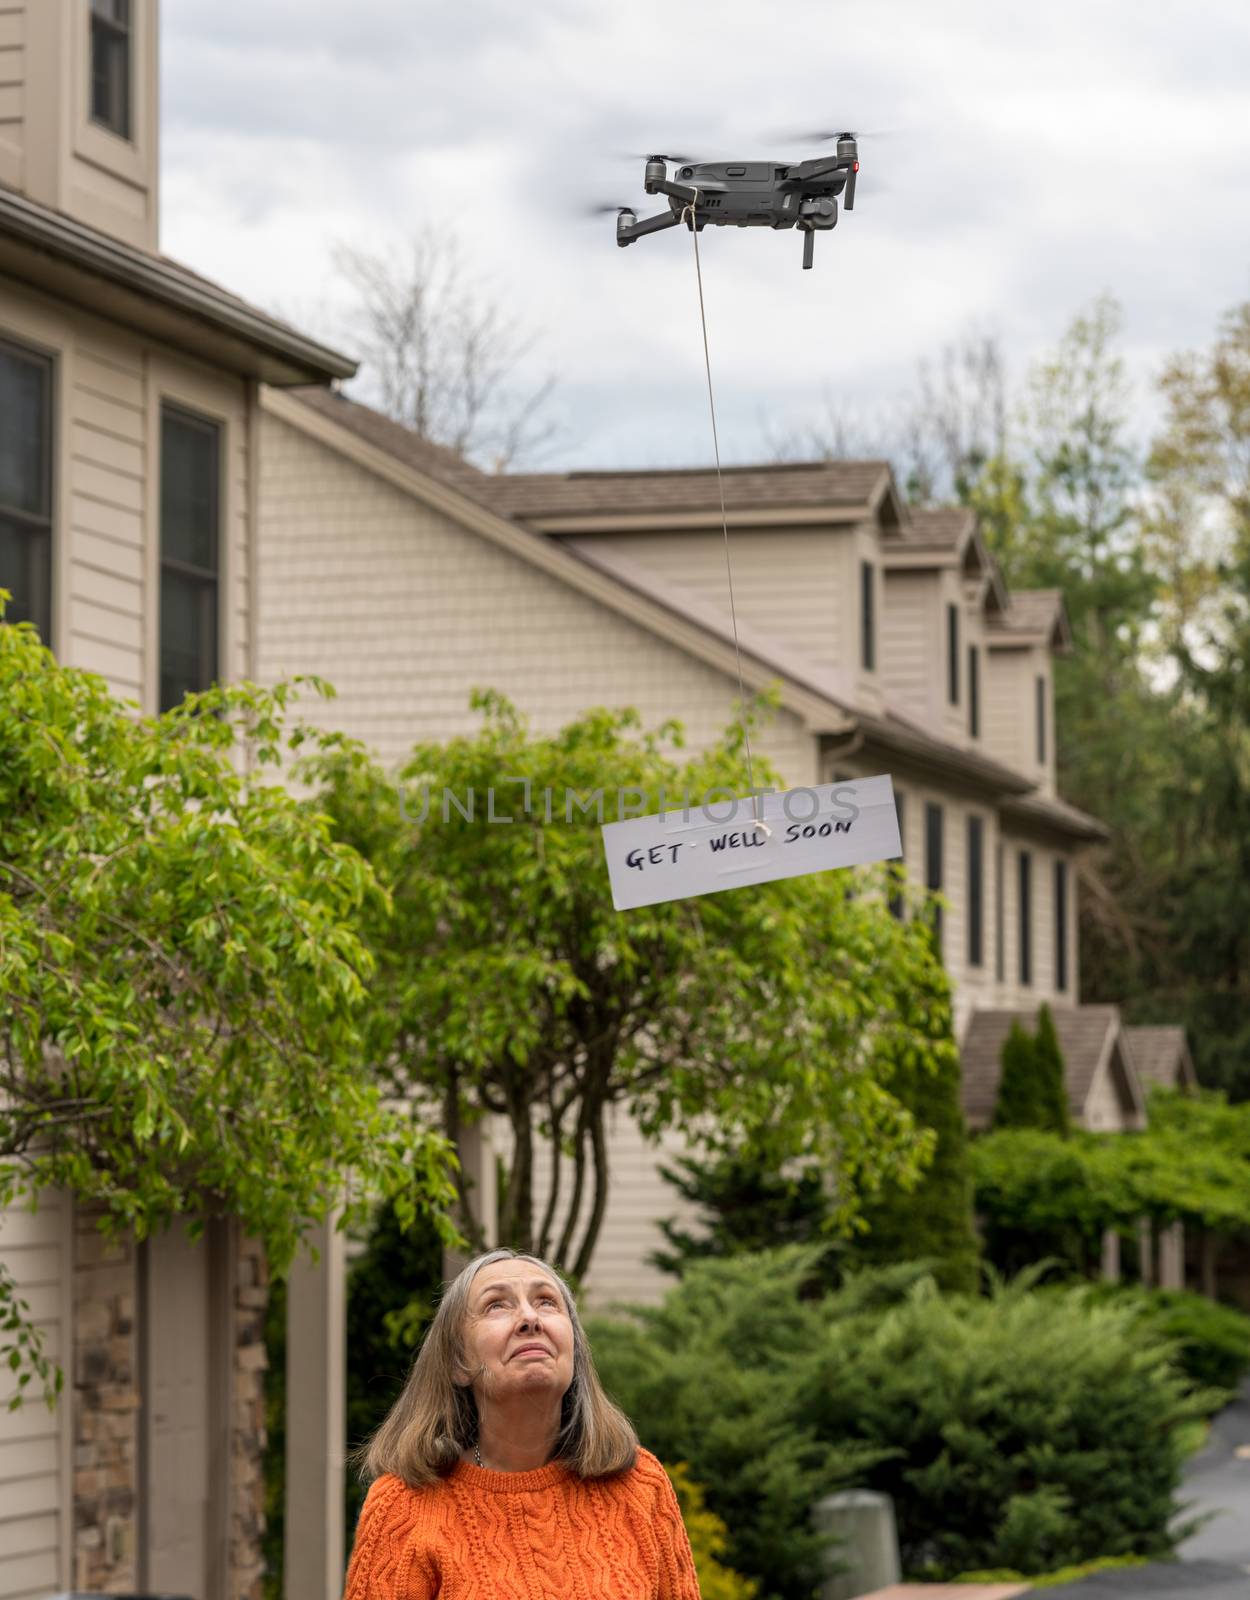 Drone delivering a get well soon message to isolated senior woman by steheap